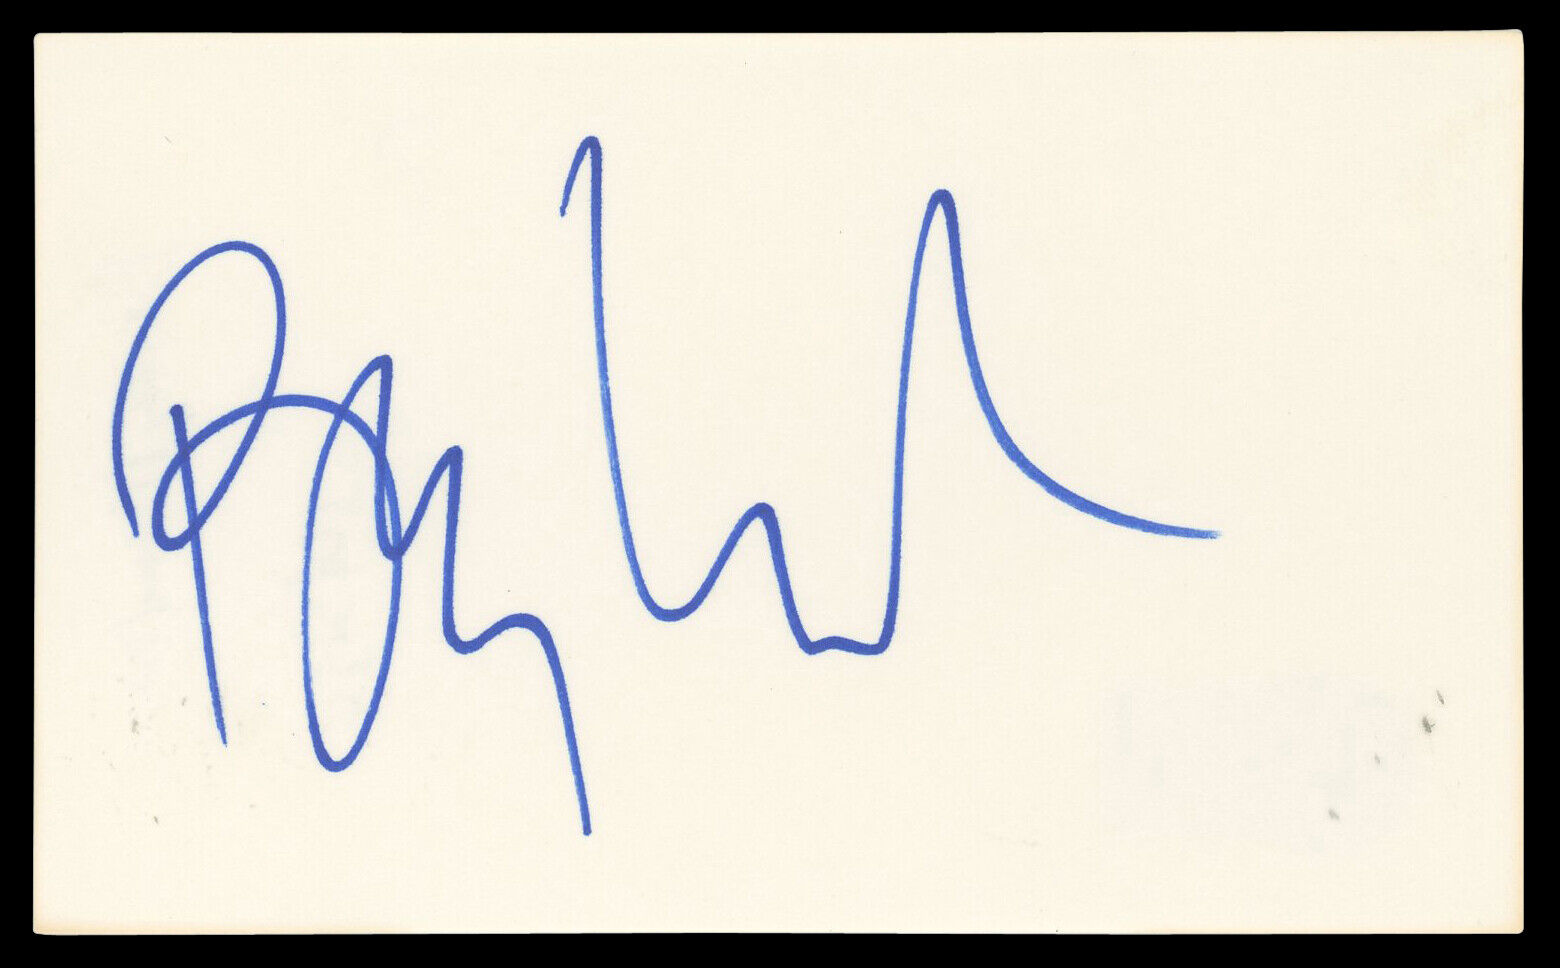 Barry Manilow Singer Authentic Signed 3x5 Index Card Autographed BAS #BN35213